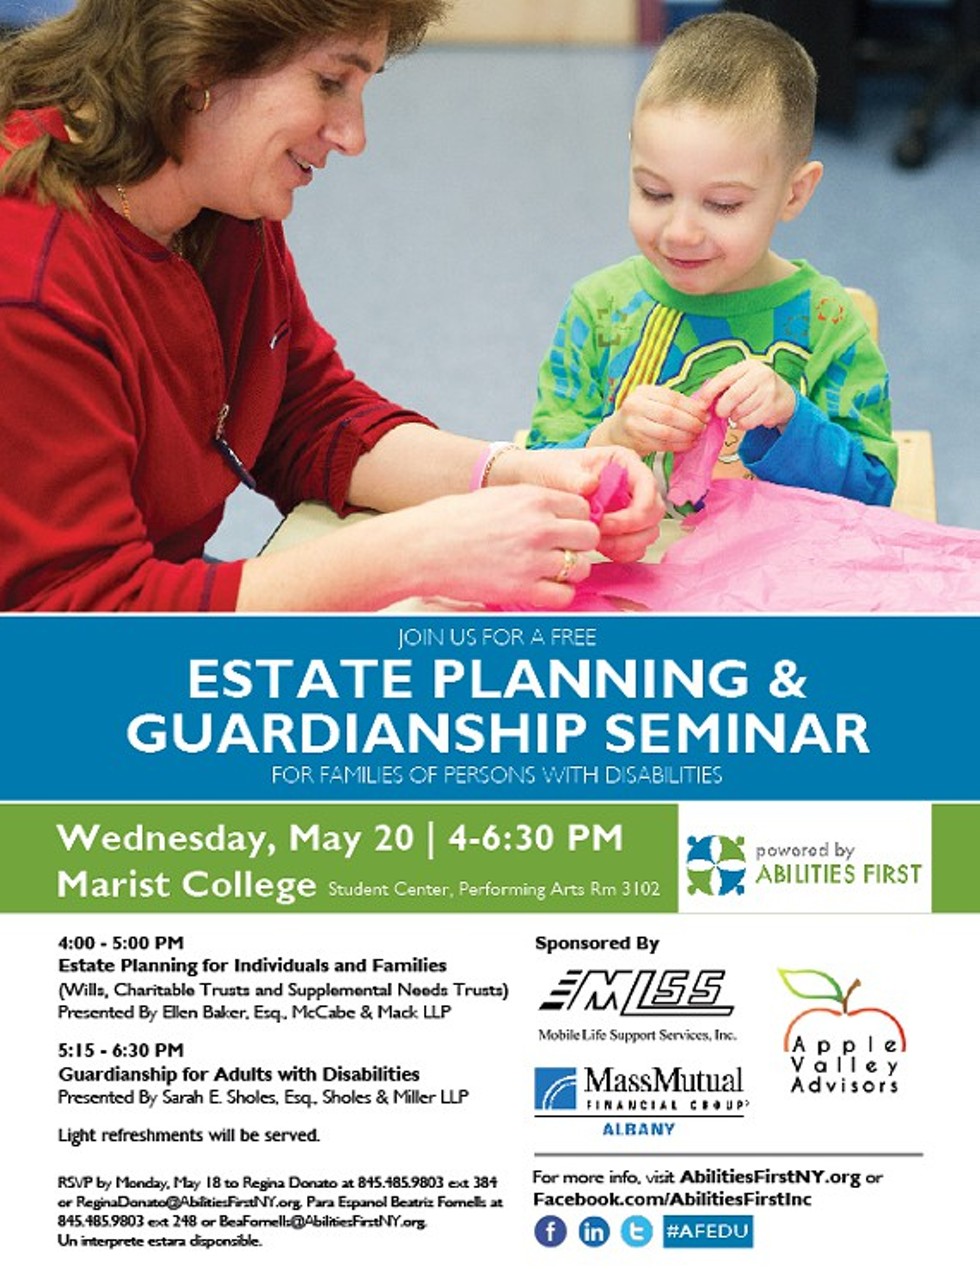 FREE Estate Planning & Guardianship Seminar for families of persons with disabilities.